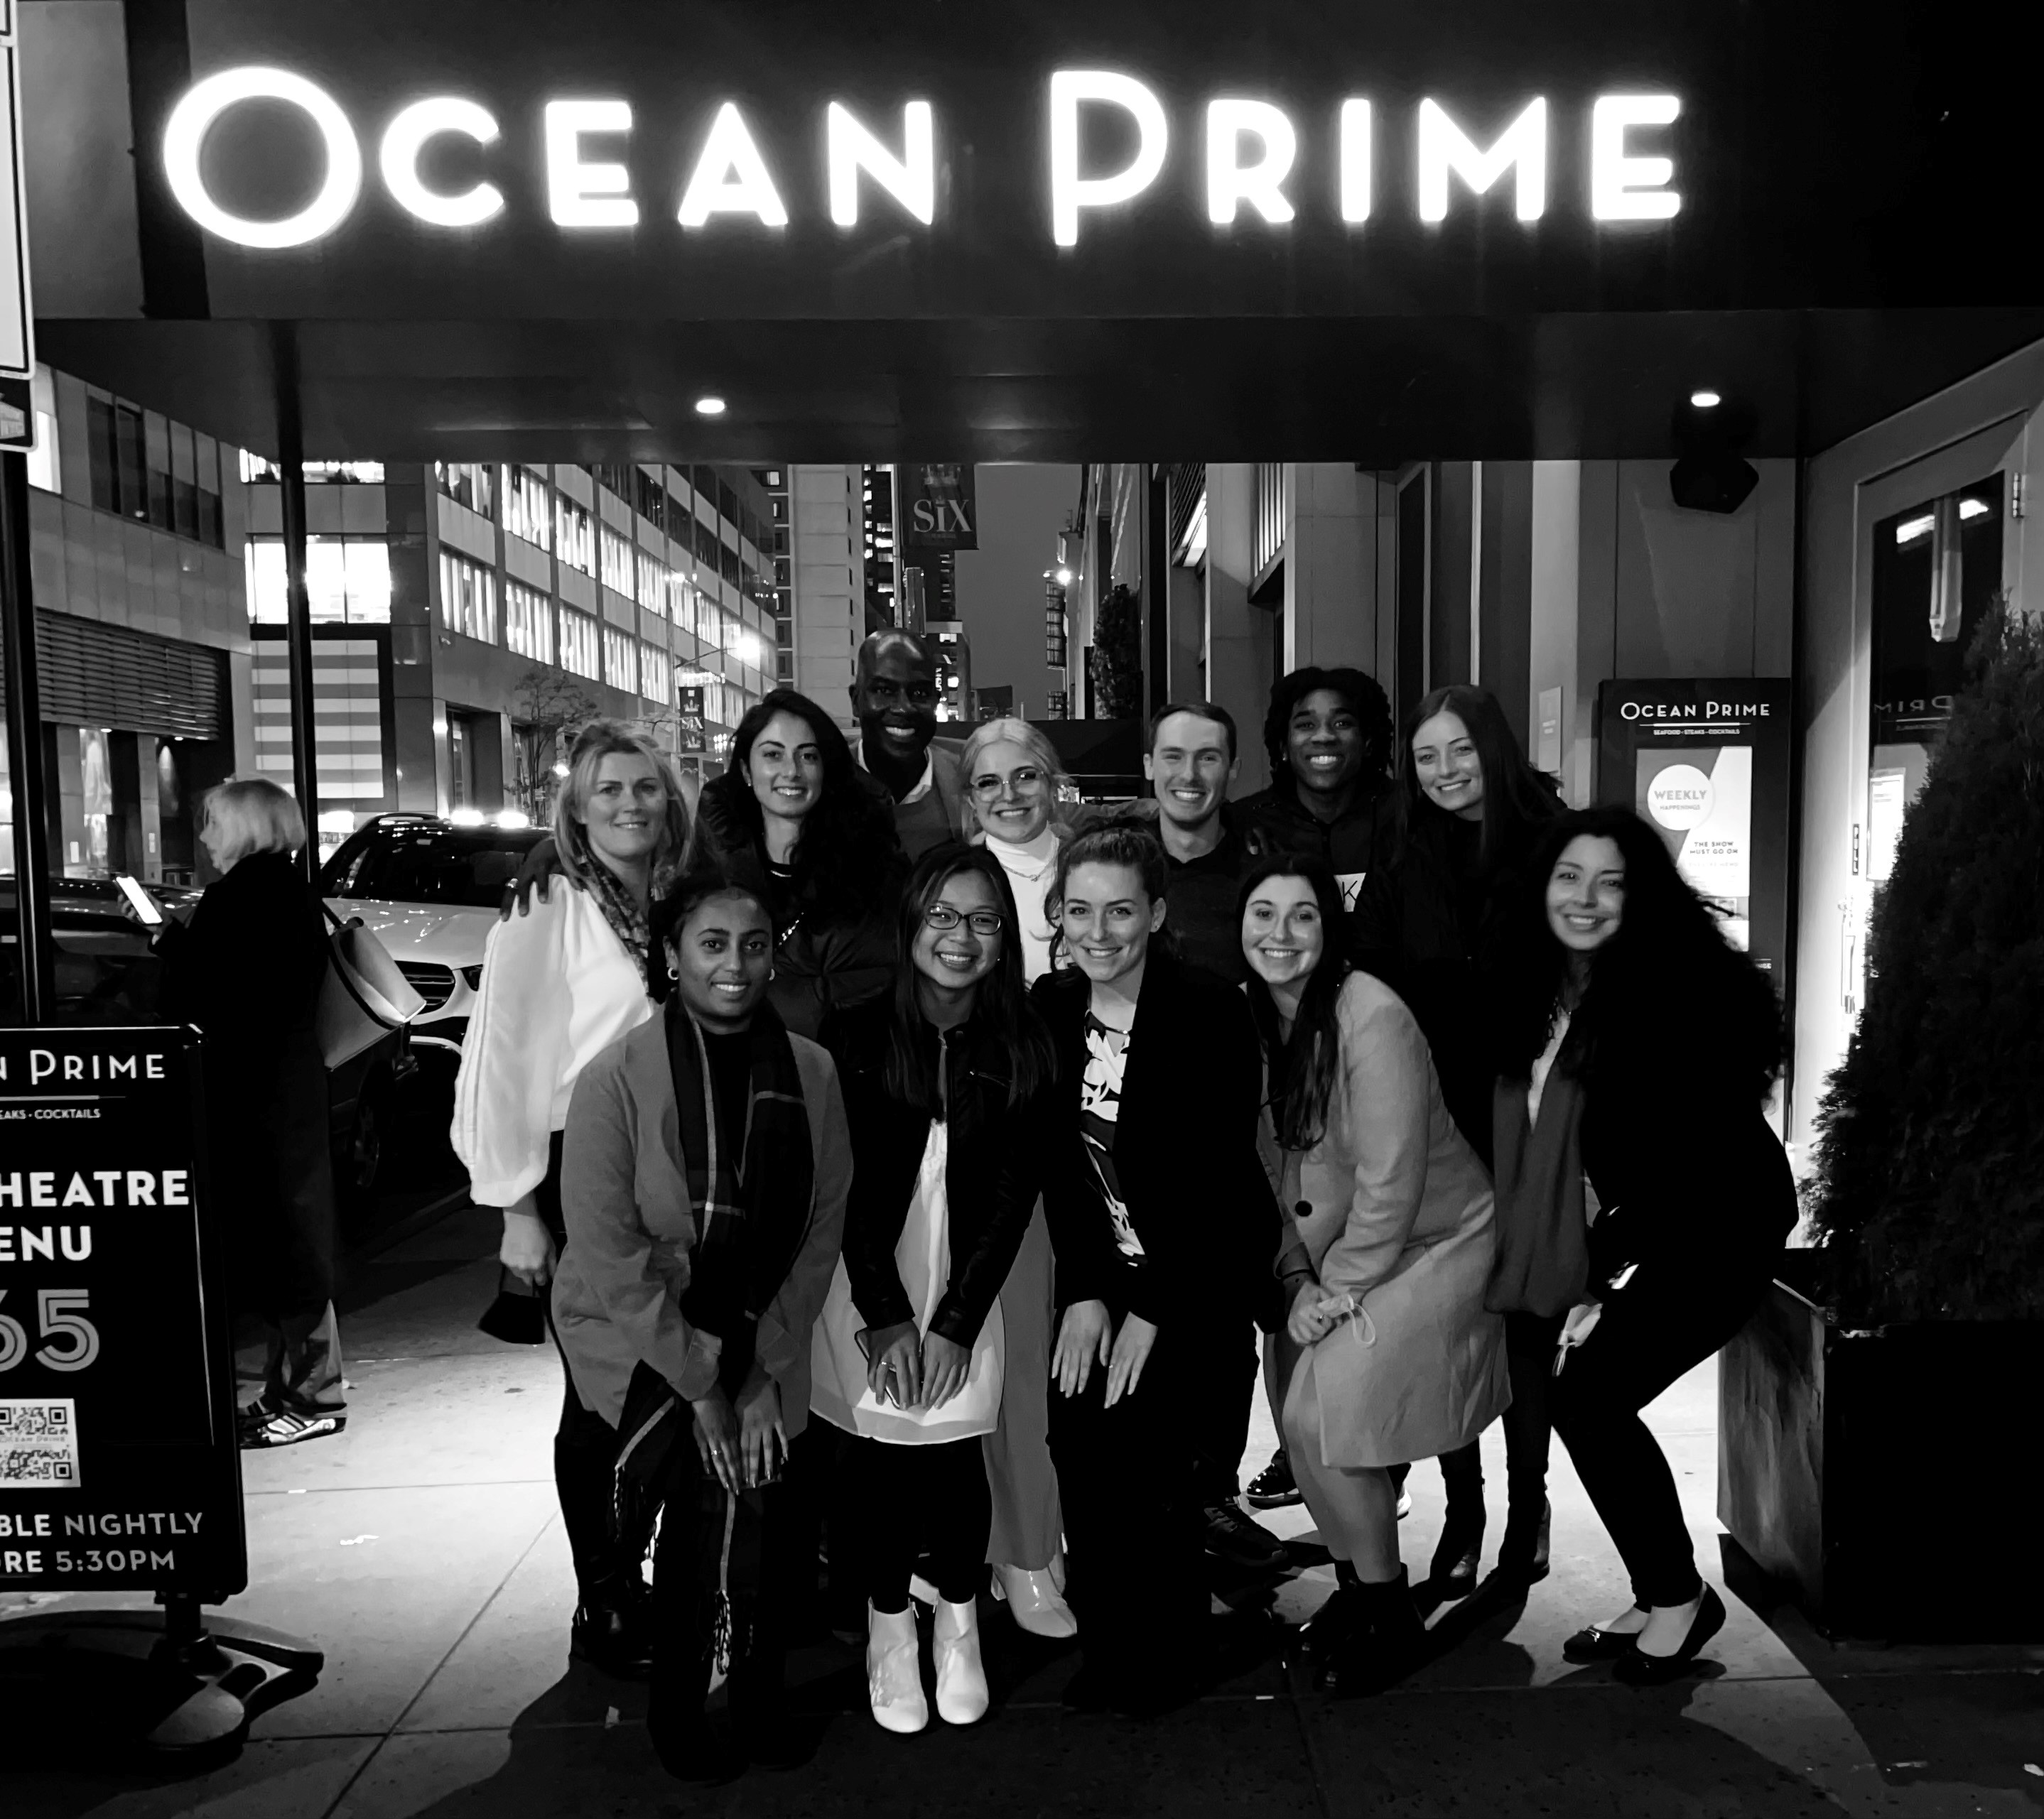 group of students in front of Ocean Prime restuarant in black and white